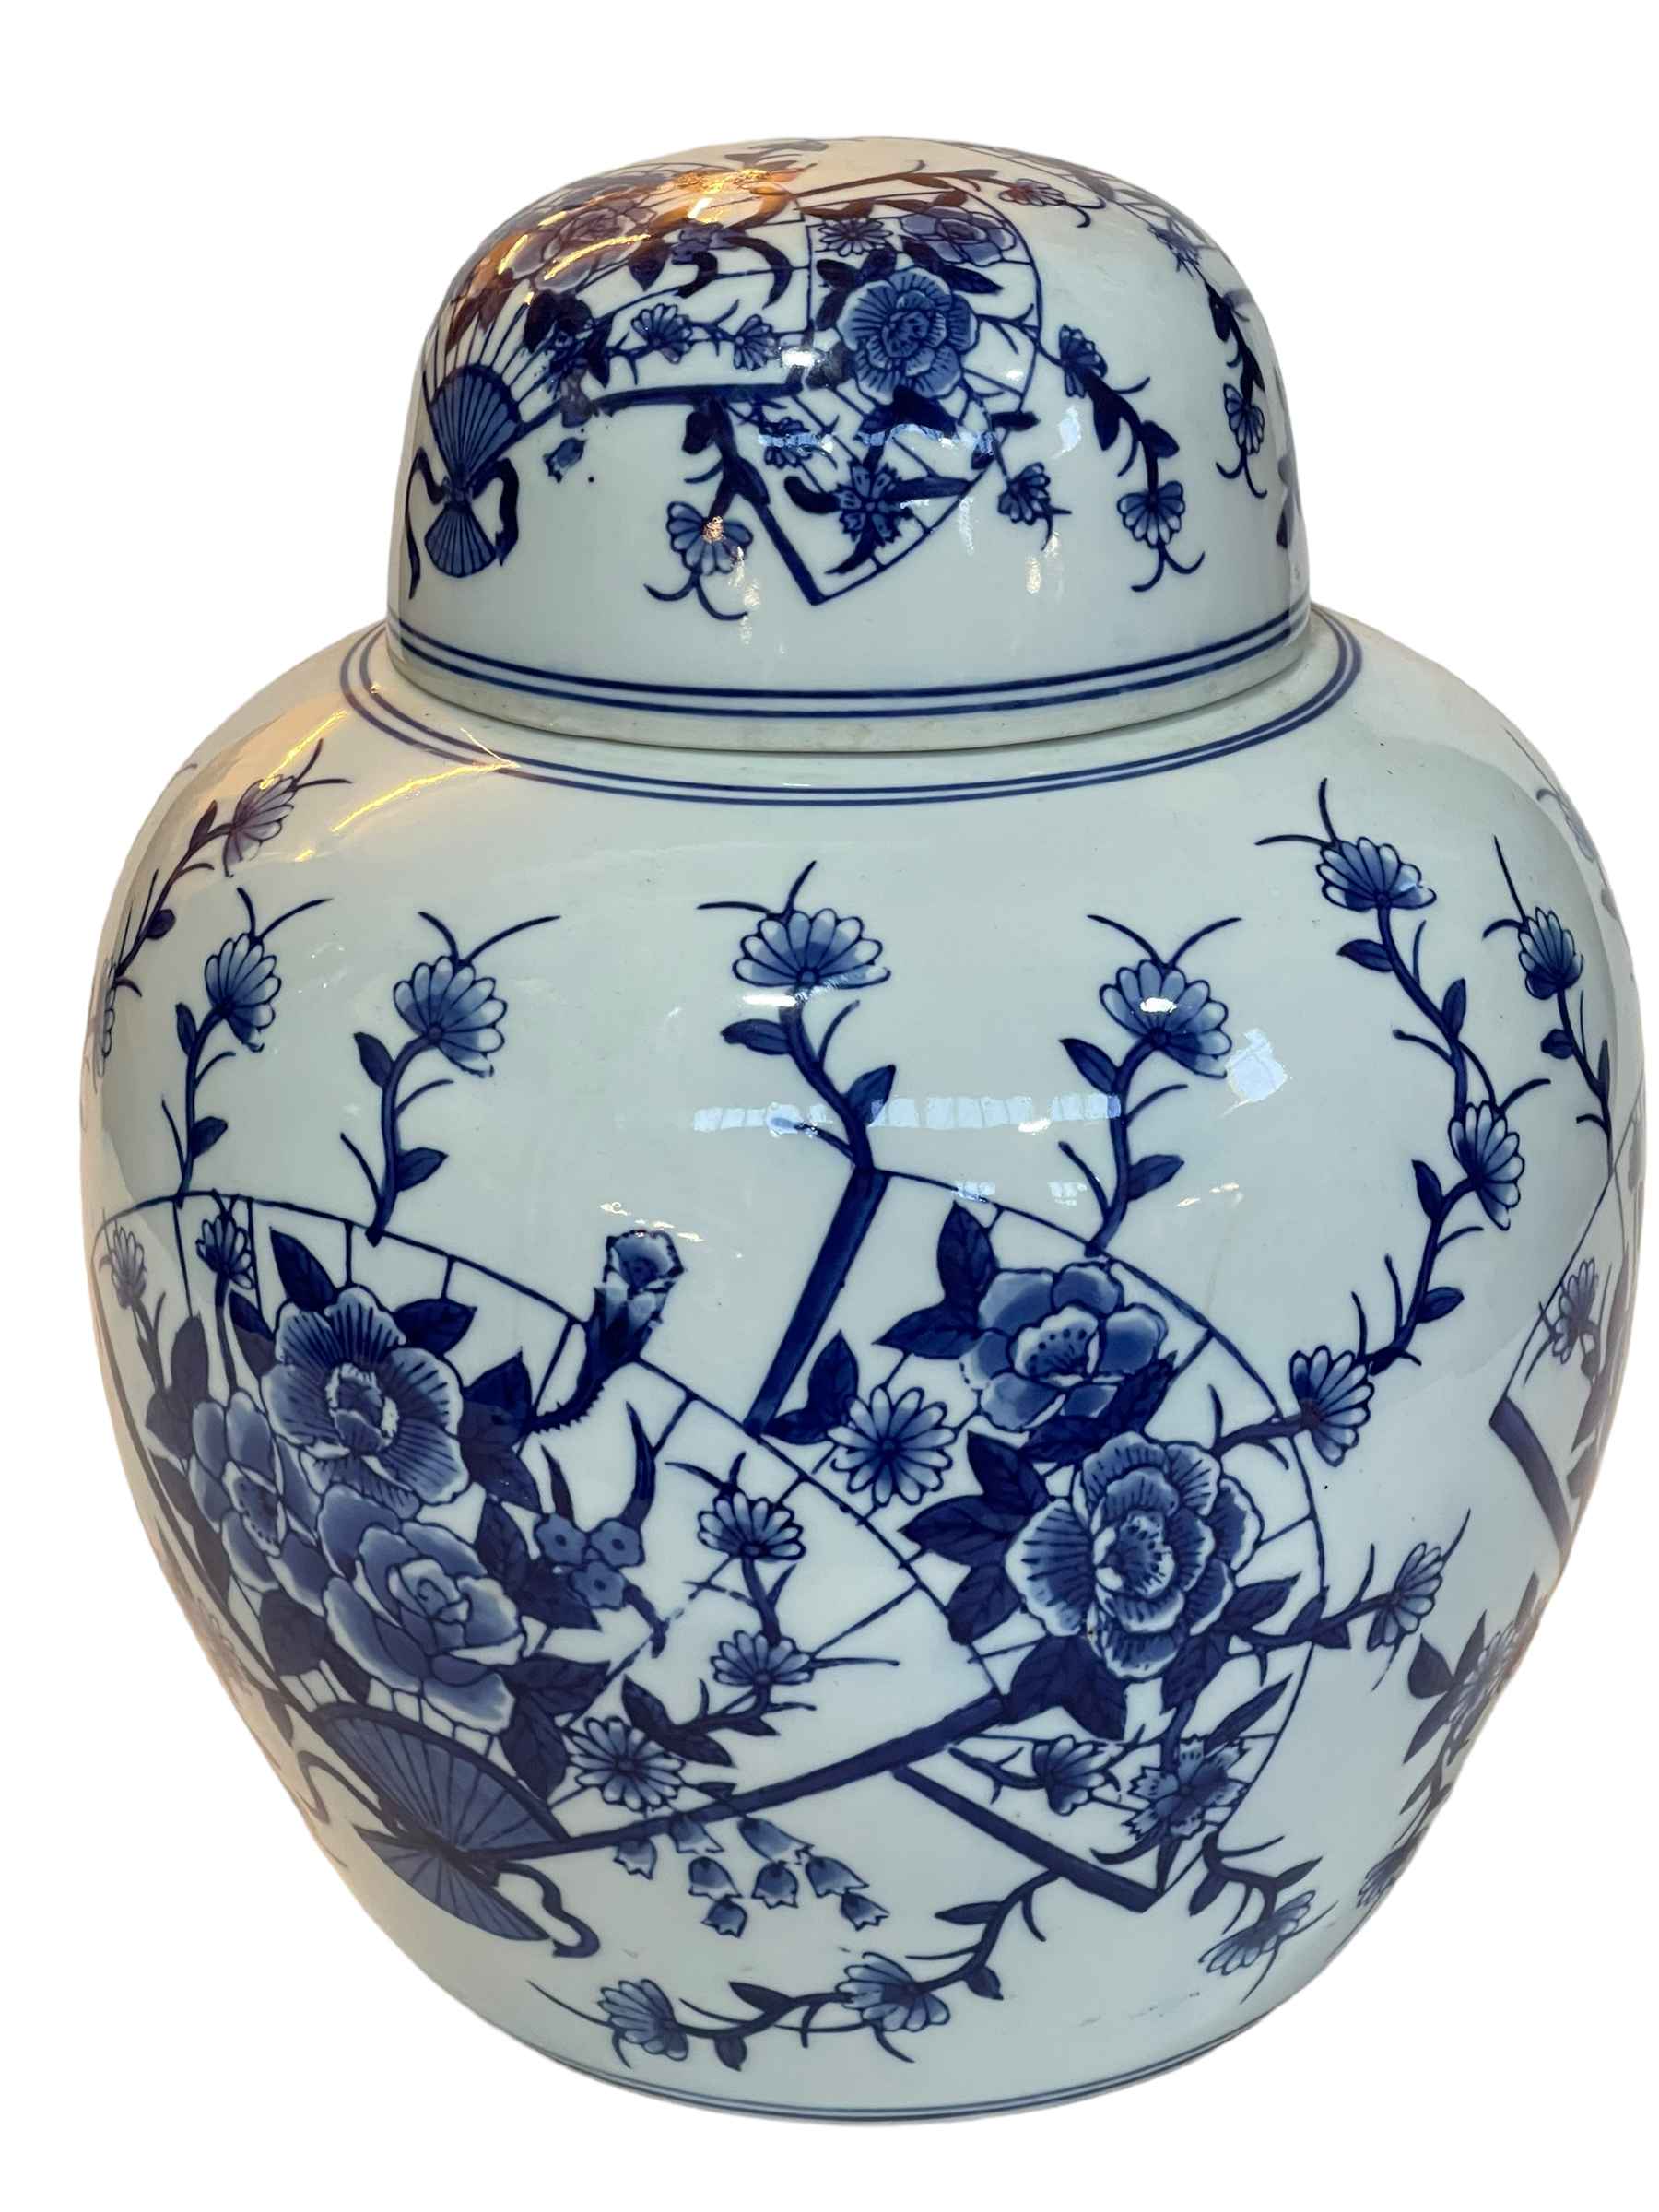 Large Chinese ginger jar with blue and white floral decoration. - Image 2 of 2